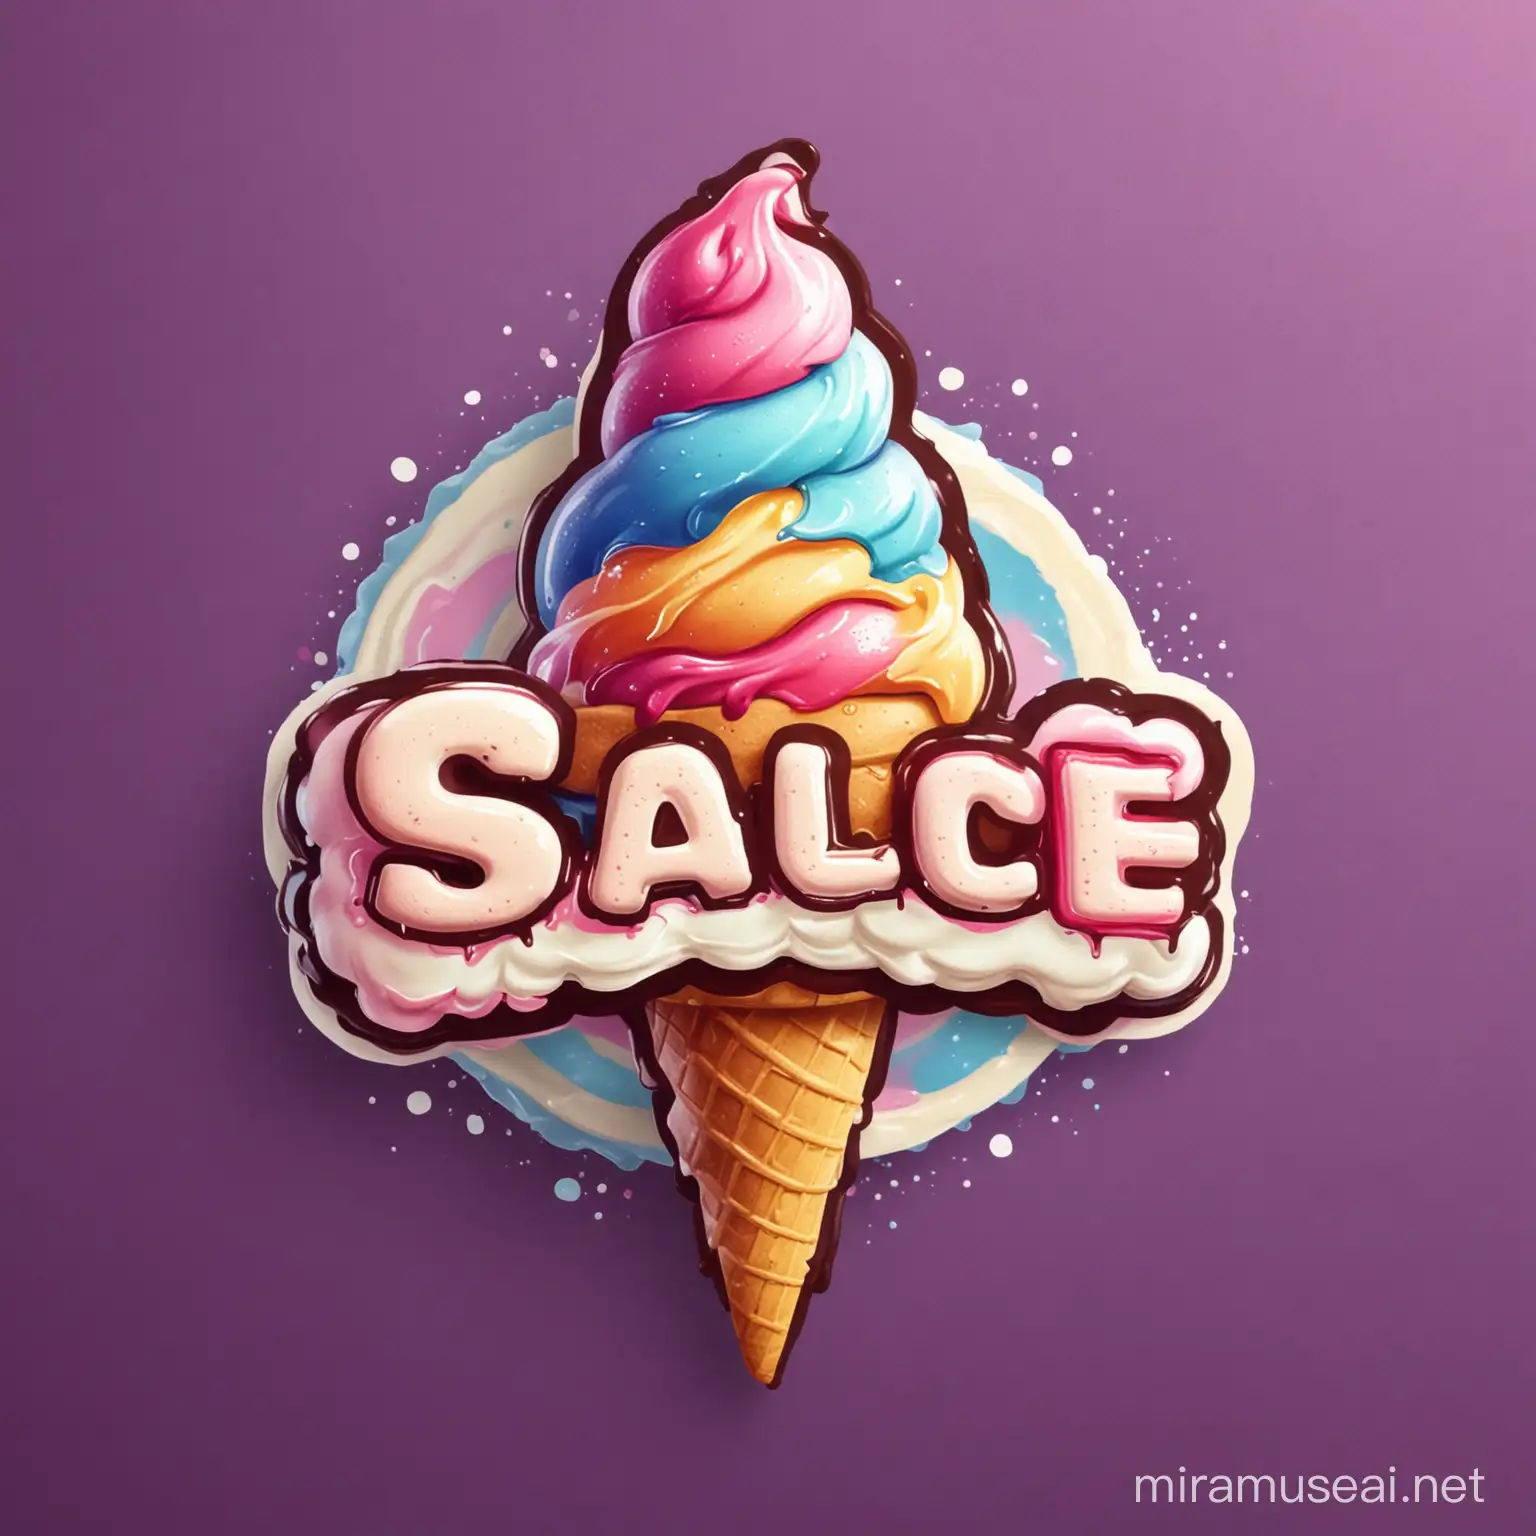 the logo associated with the sale of ice cream